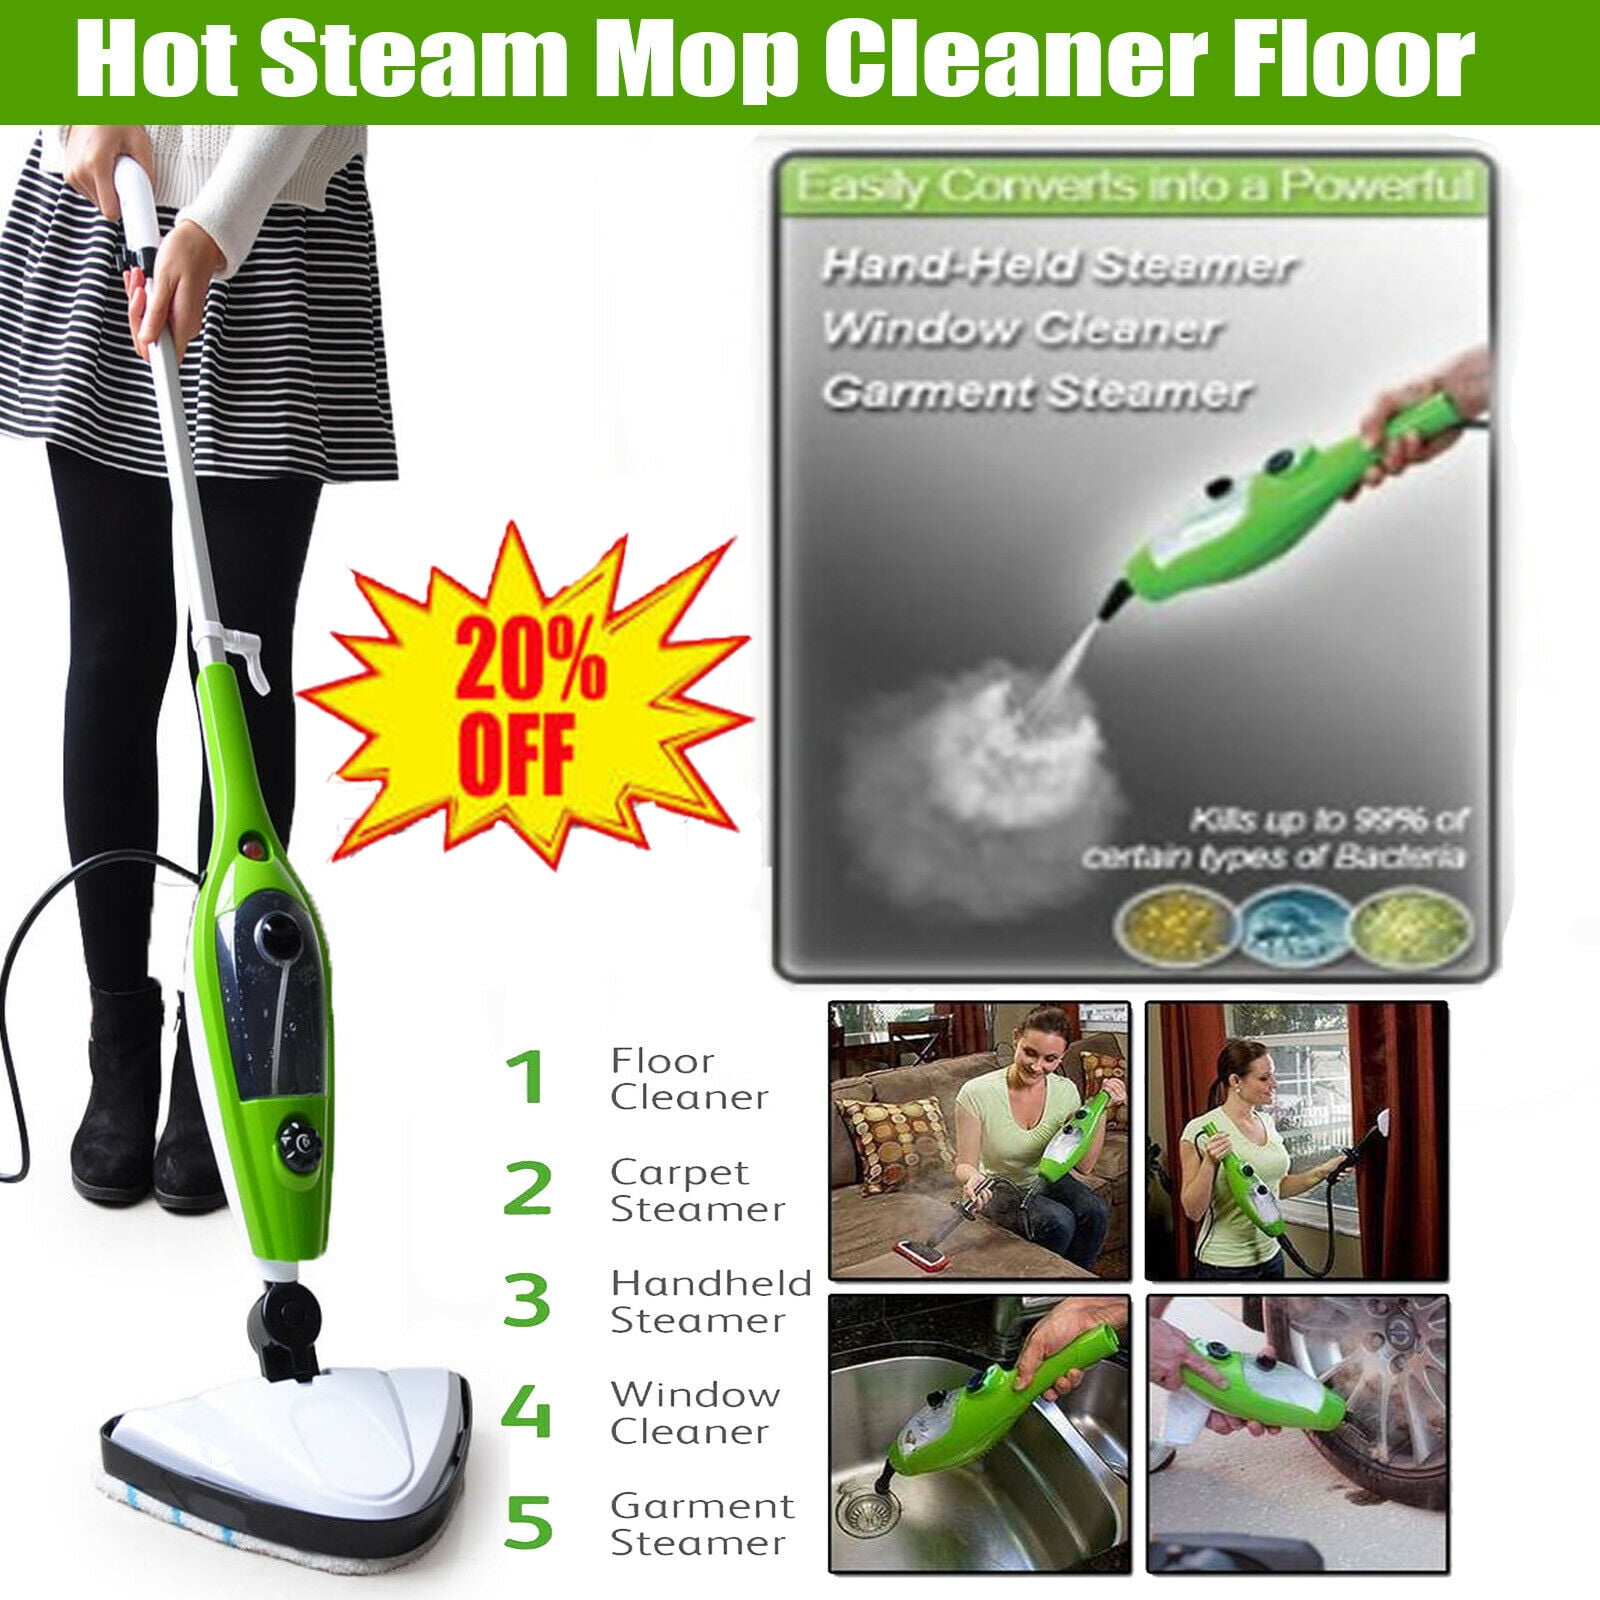 All-in-One Carpet Floor Cleaning Machine with 10 Accessories Powerful Detachable Handheld Steam Mop Cleaner Tool 10-in-1 Hot Steam Mop Cleaner 1300W Electric Multifunctional Mop for Floor Cleaning 